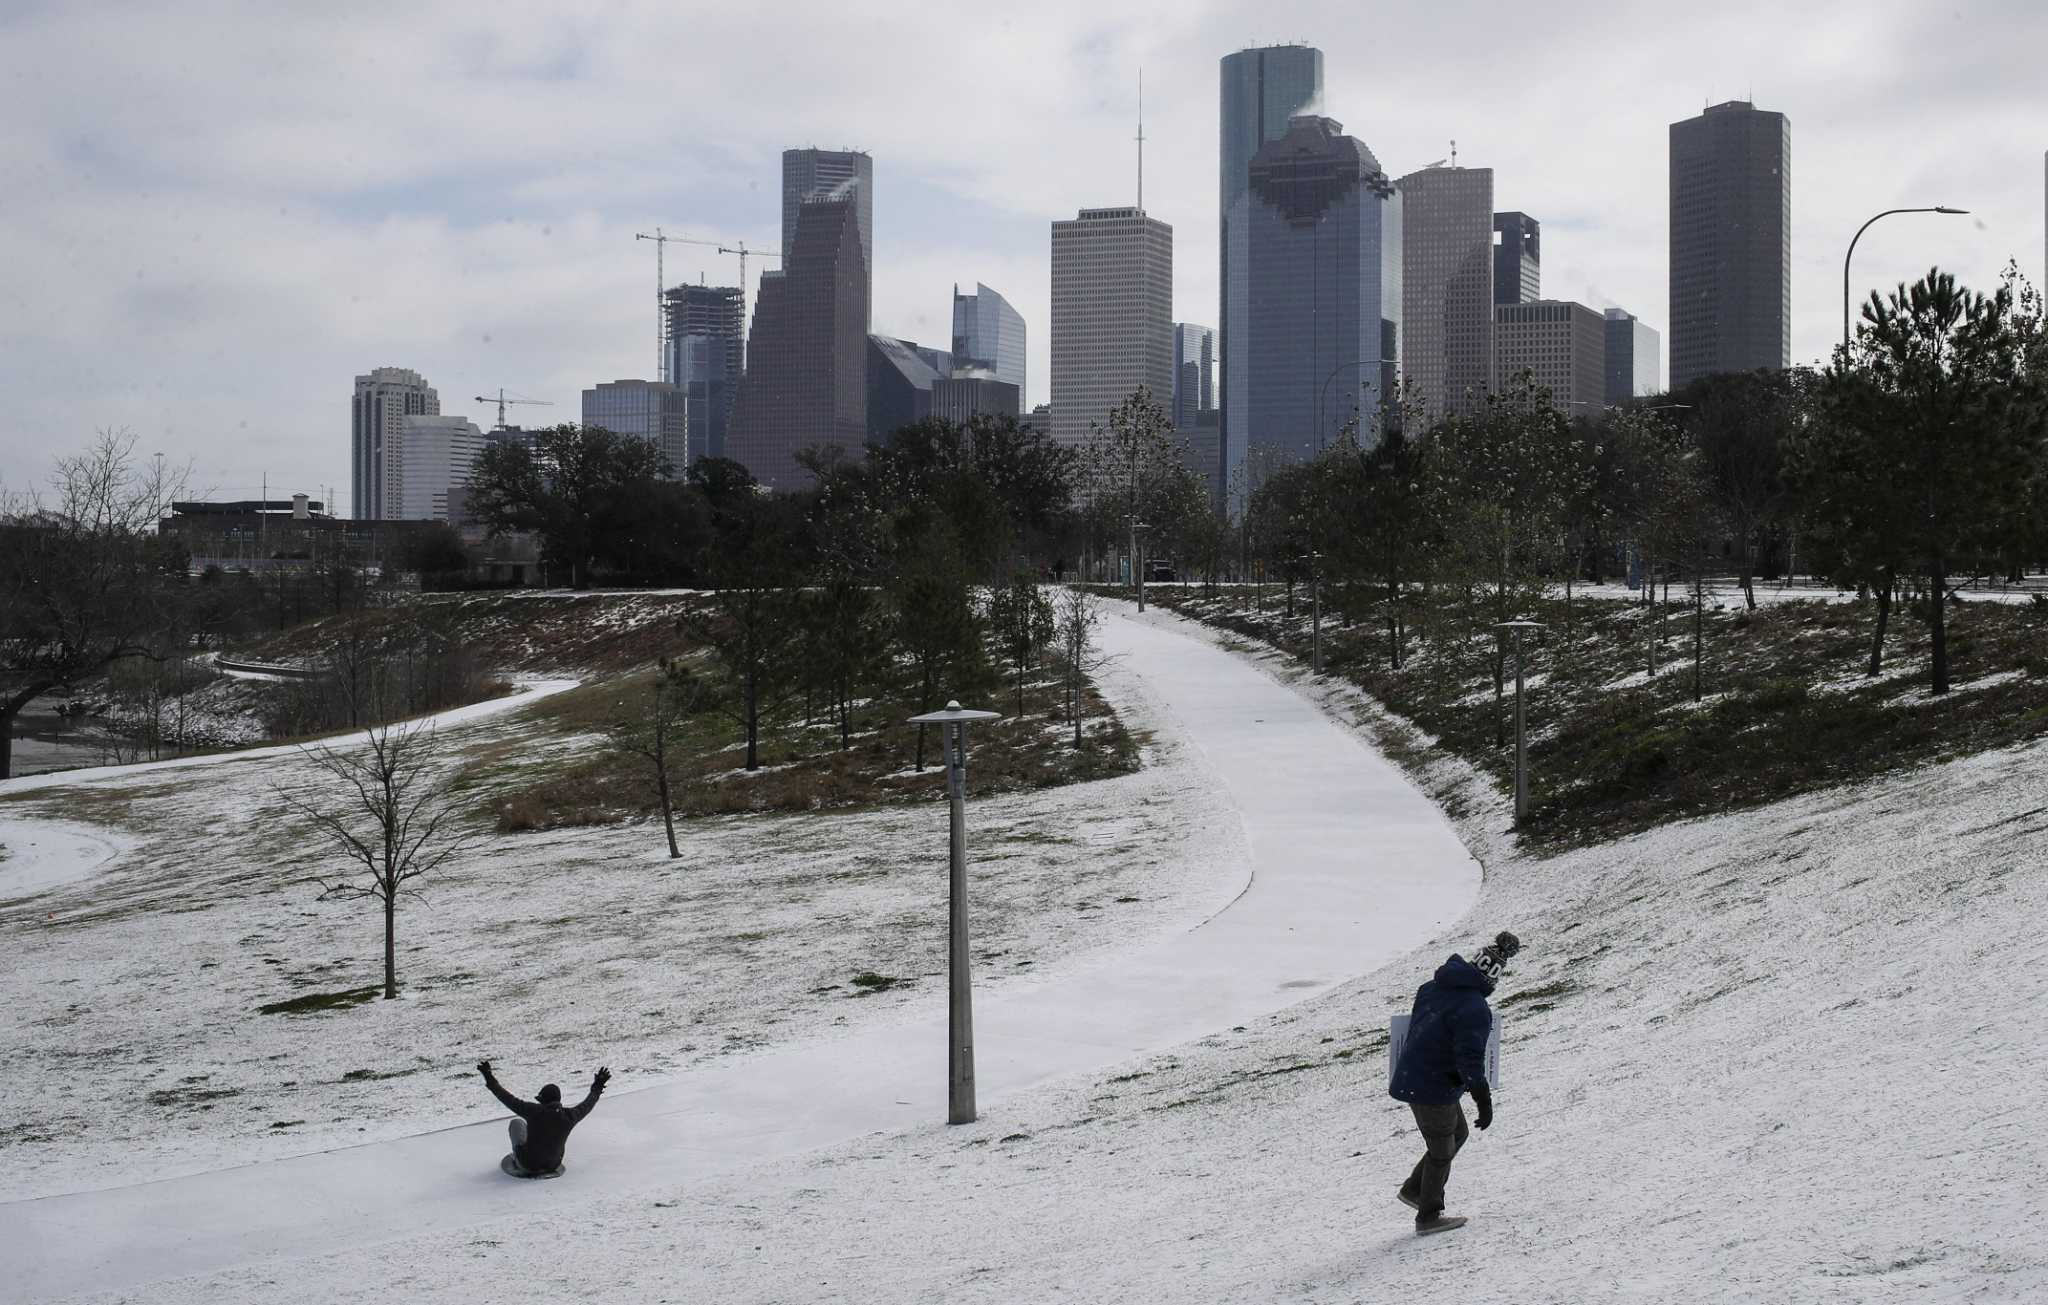 Winter looks especially warm in Texas this year, NOAA says